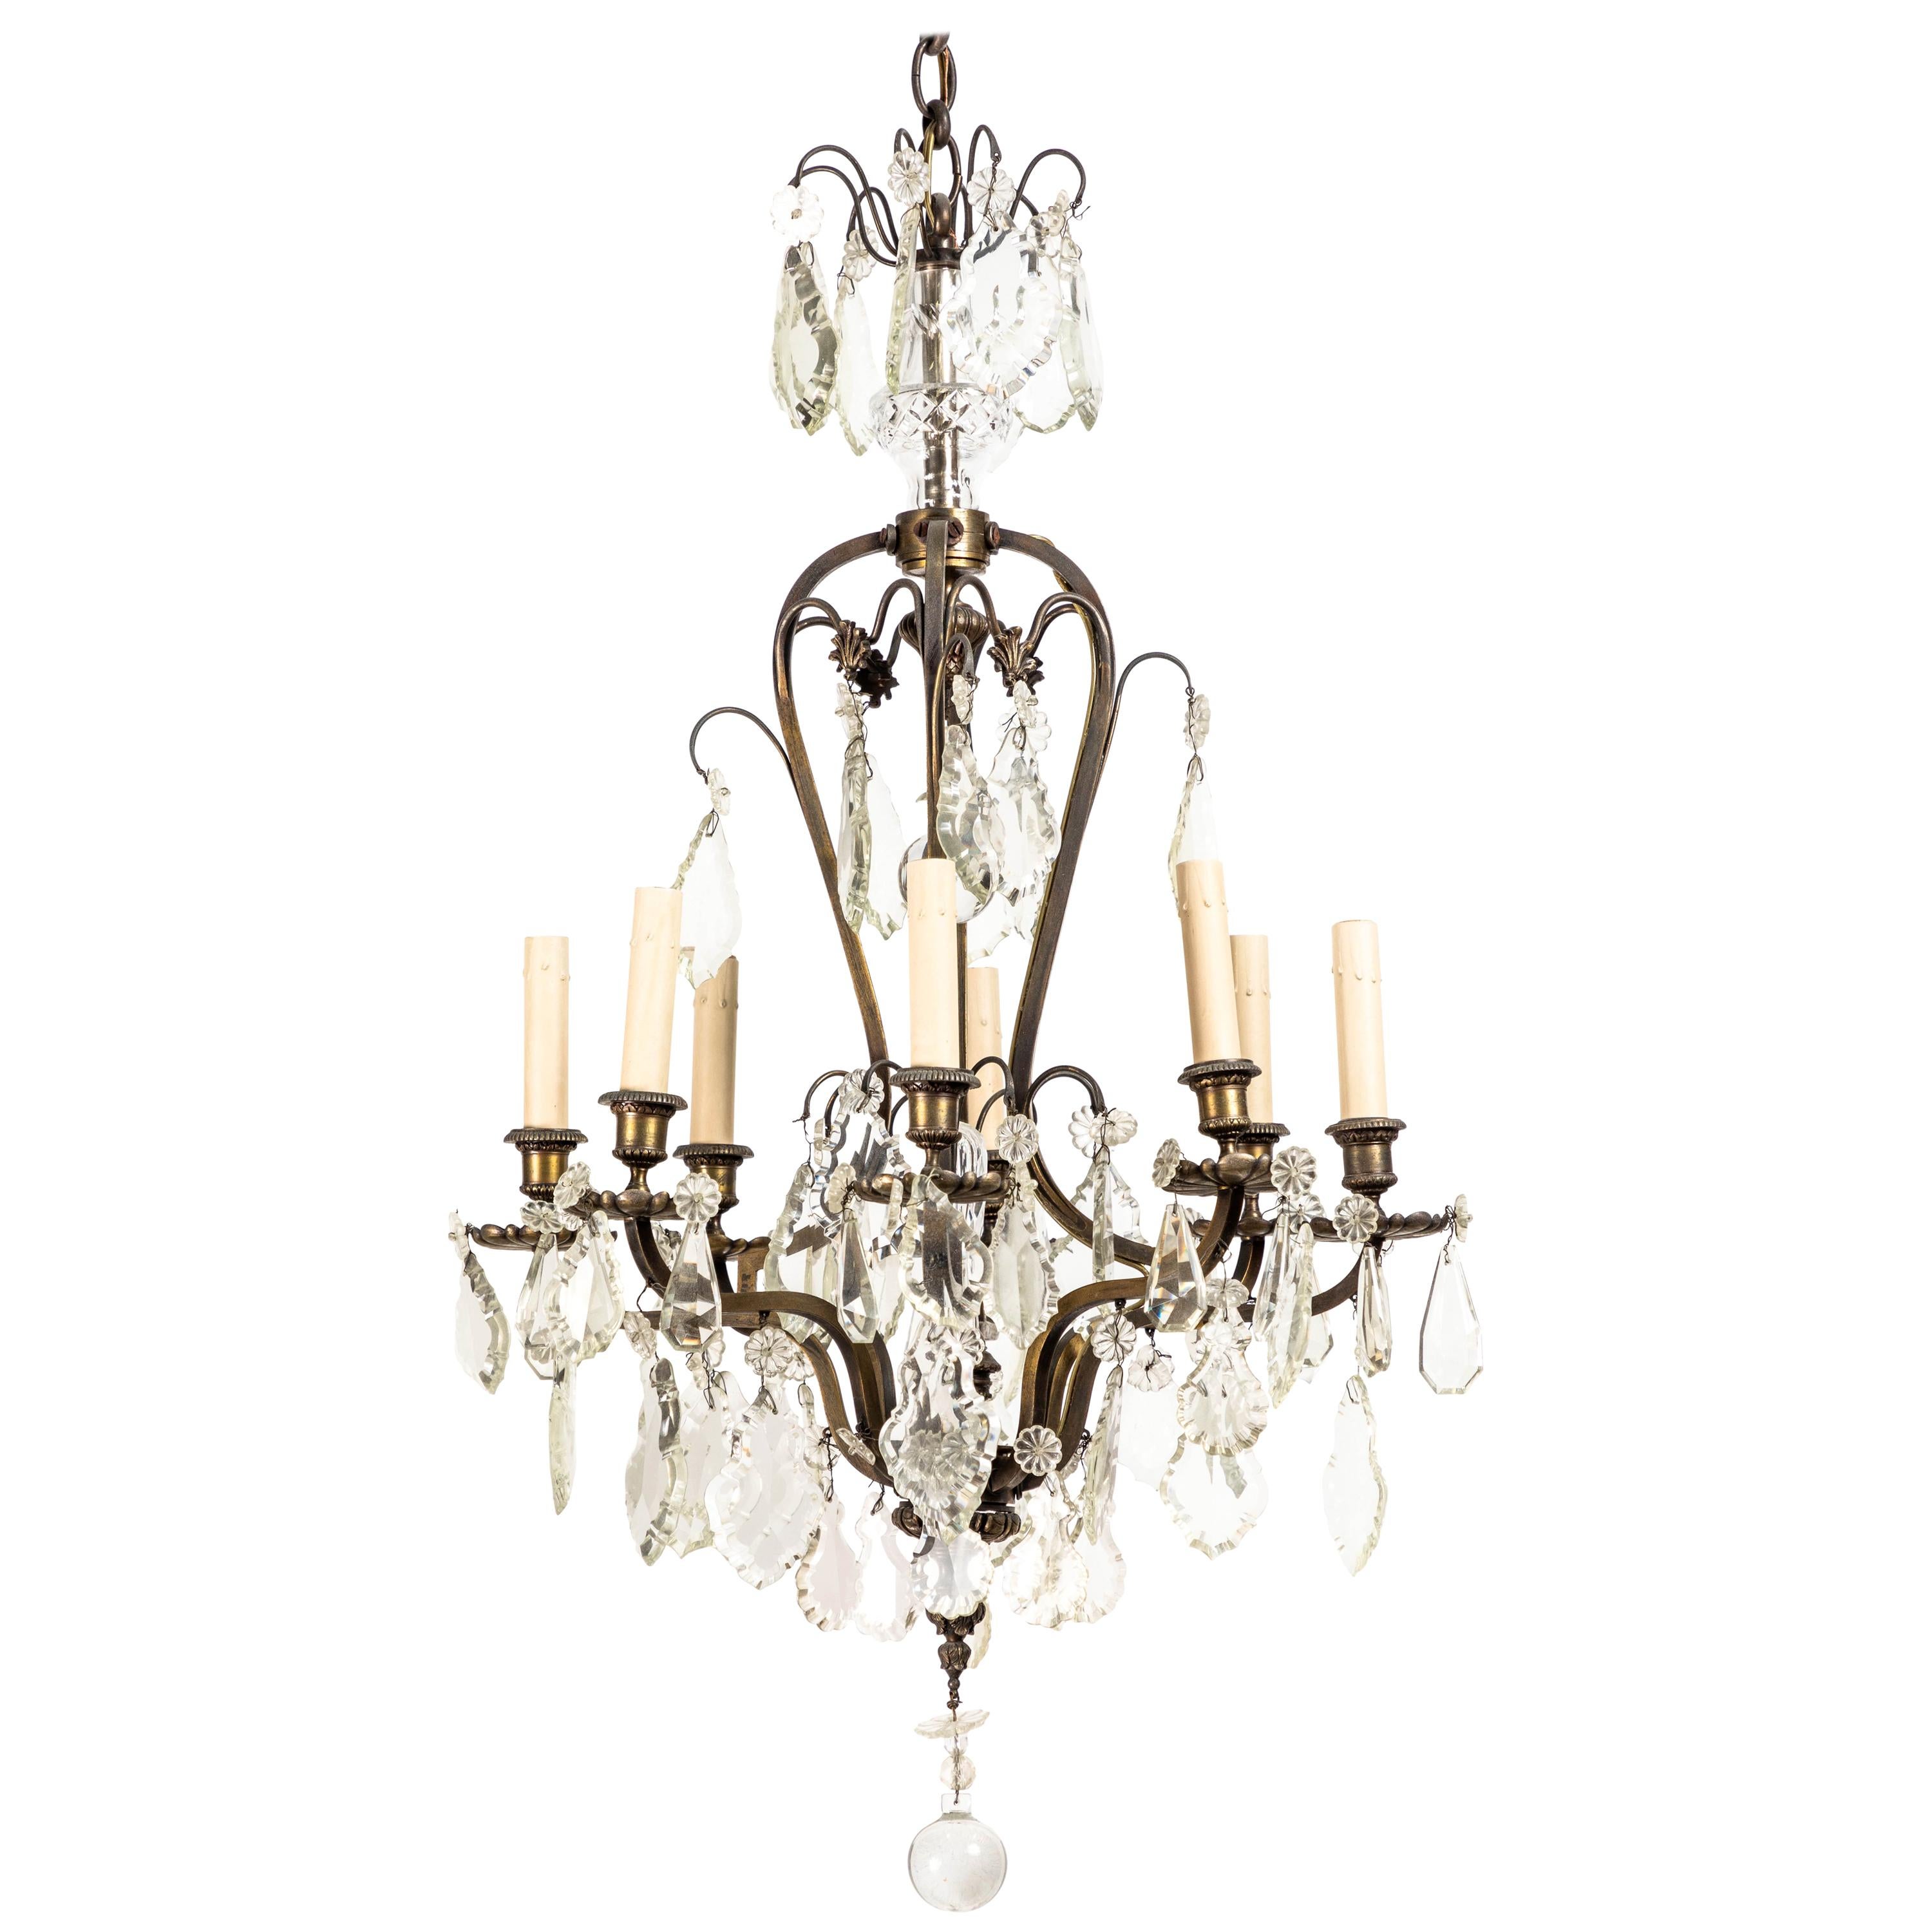 19th Century French Rococo Style Bronze 8-Light Chandelier with Handcut Crystals For Sale